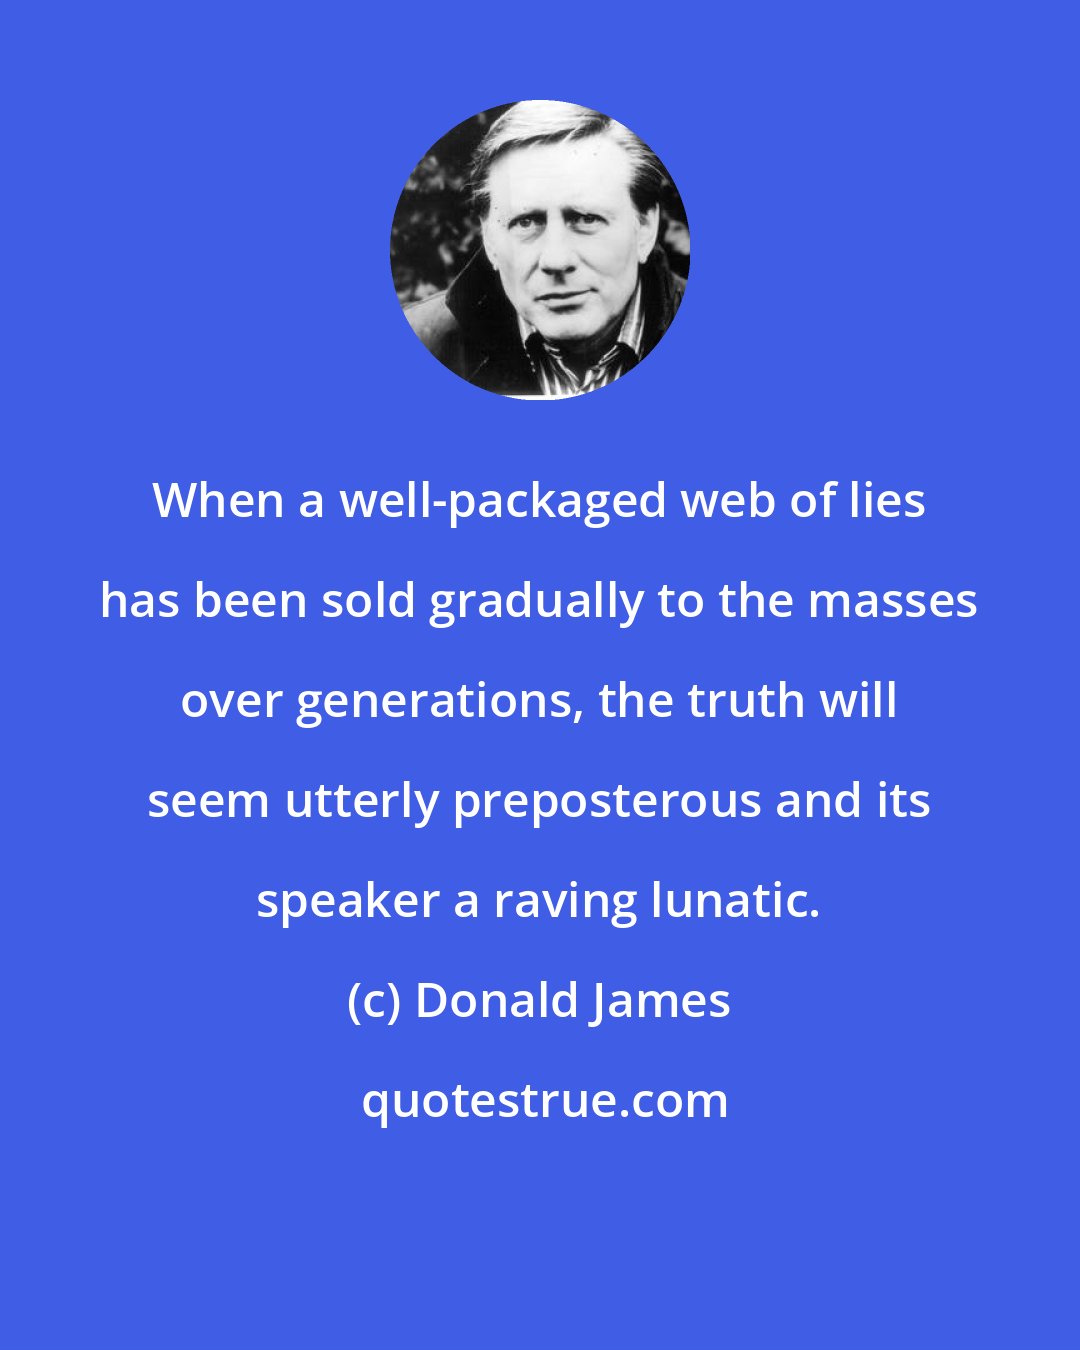 Donald James: When a well-packaged web of lies has been sold gradually to the masses over generations, the truth will seem utterly preposterous and its speaker a raving lunatic.